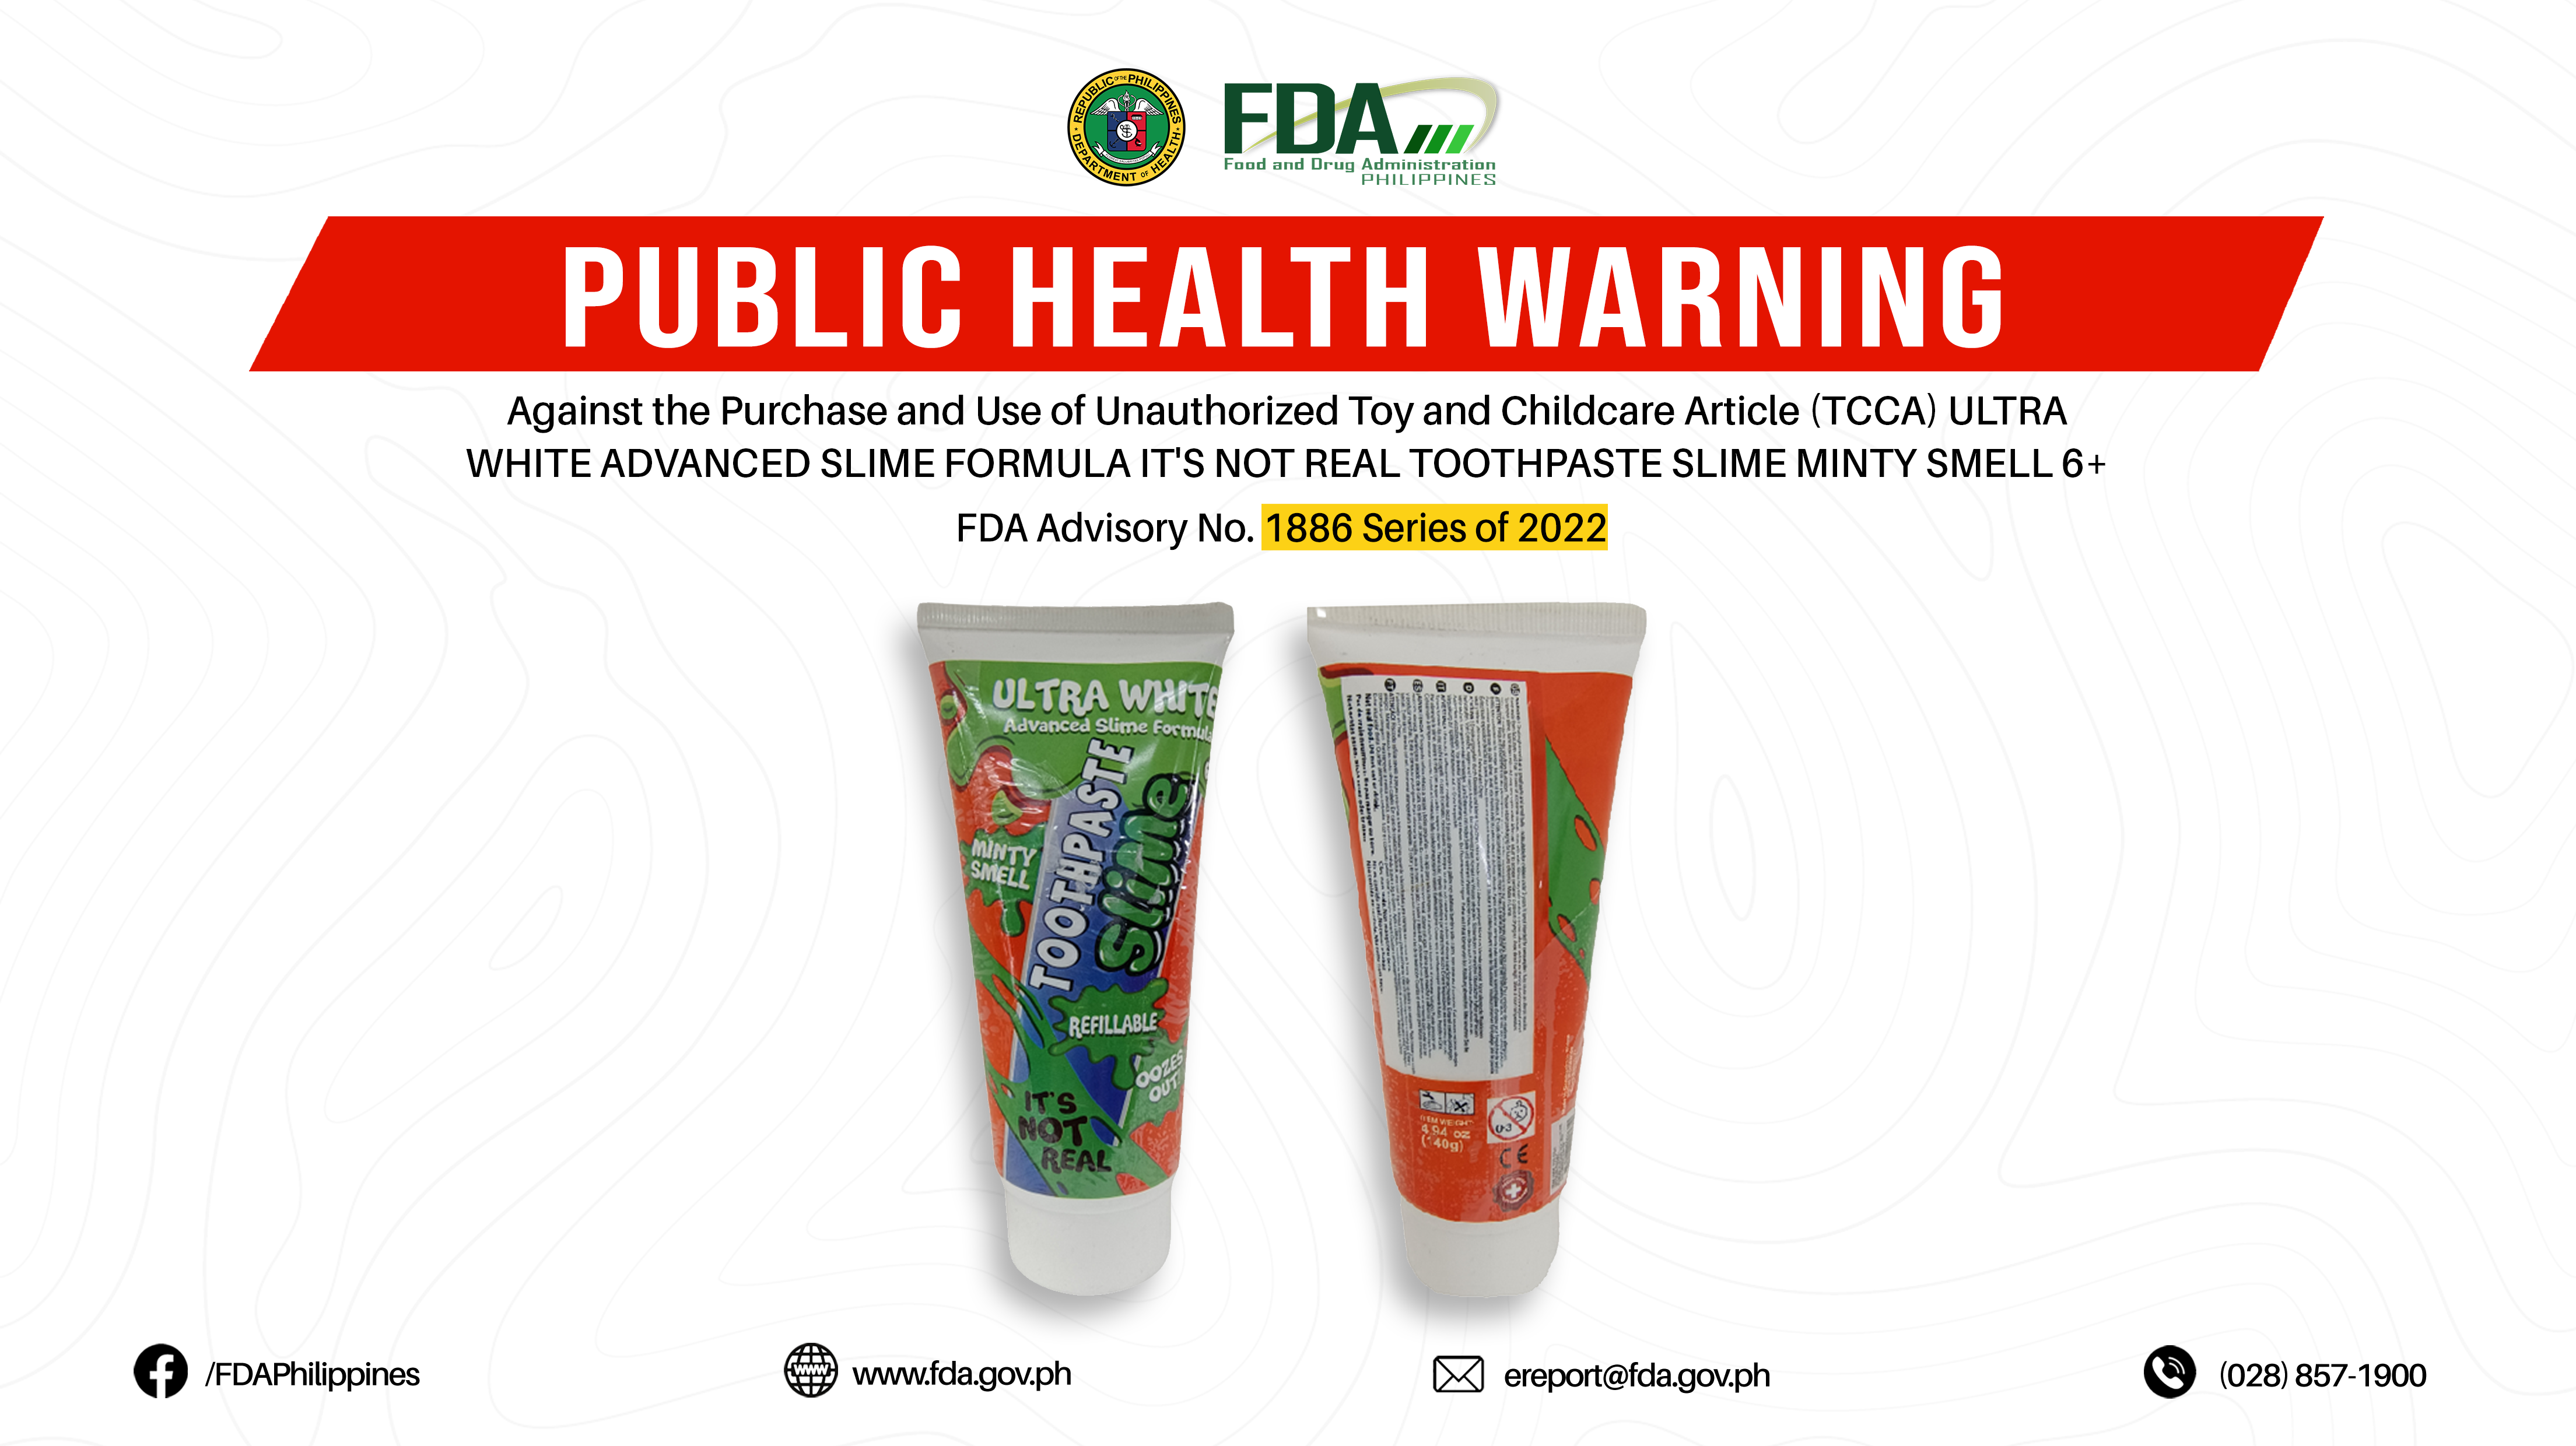 FDA Advisory No.2022-1886 || Public Health Warning Against the Purchase and Use of Unauthorized Toy and Childcare Article (TCCA) ULTRA WHITE ADVANCED SLIME FORMULA IT’S NOT REAL TOOTHPASTE SLIME MINTY SMELL 6+